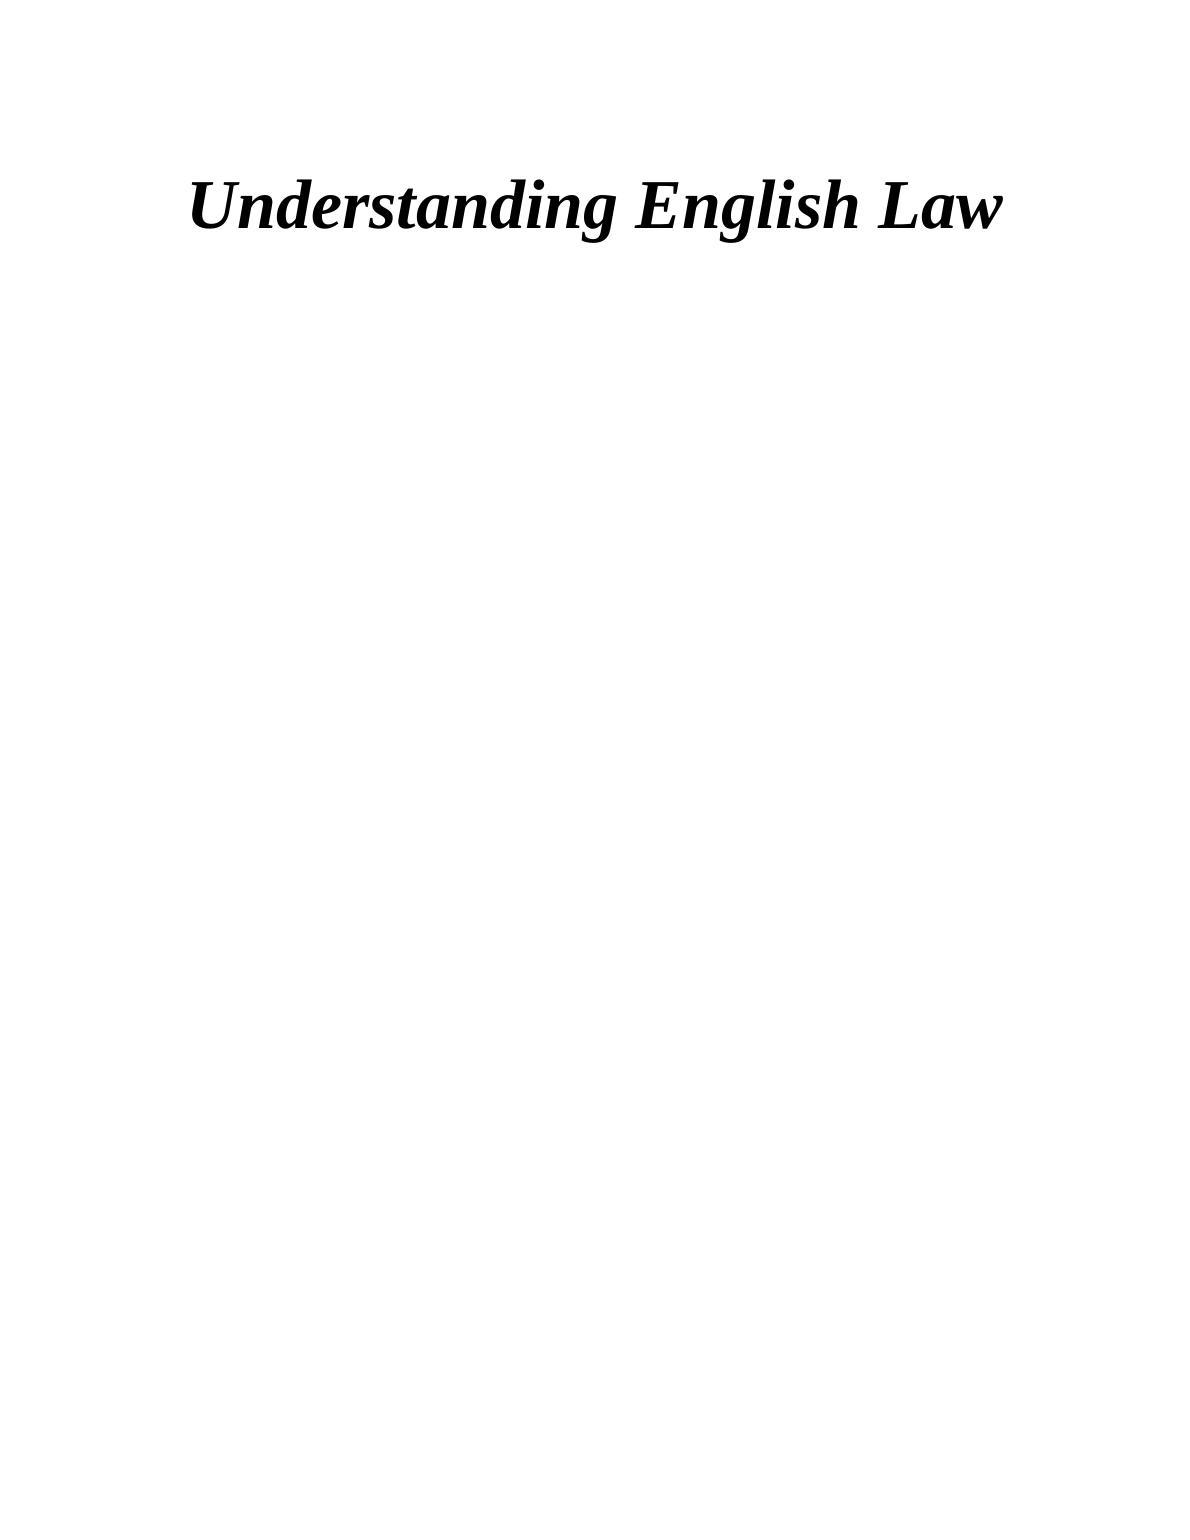 Modern Sources of English Law_1